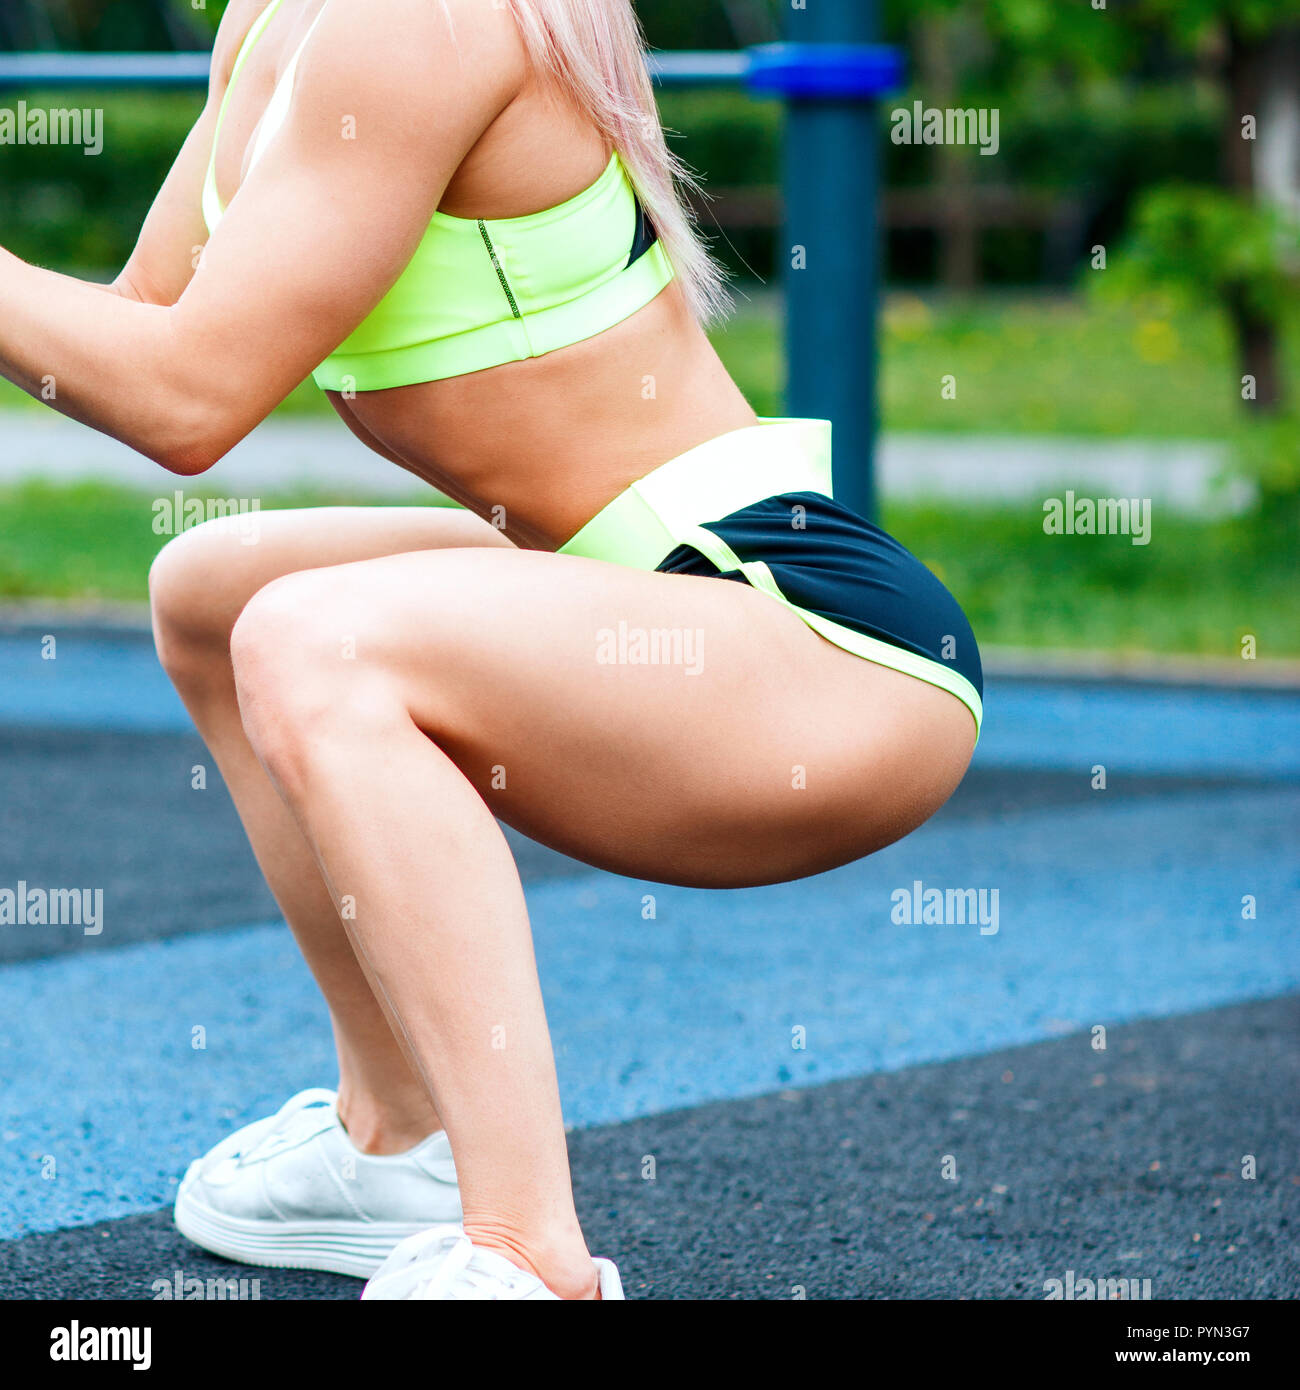 Sports girl in sportswear squatting in the summer park. Stock Photo